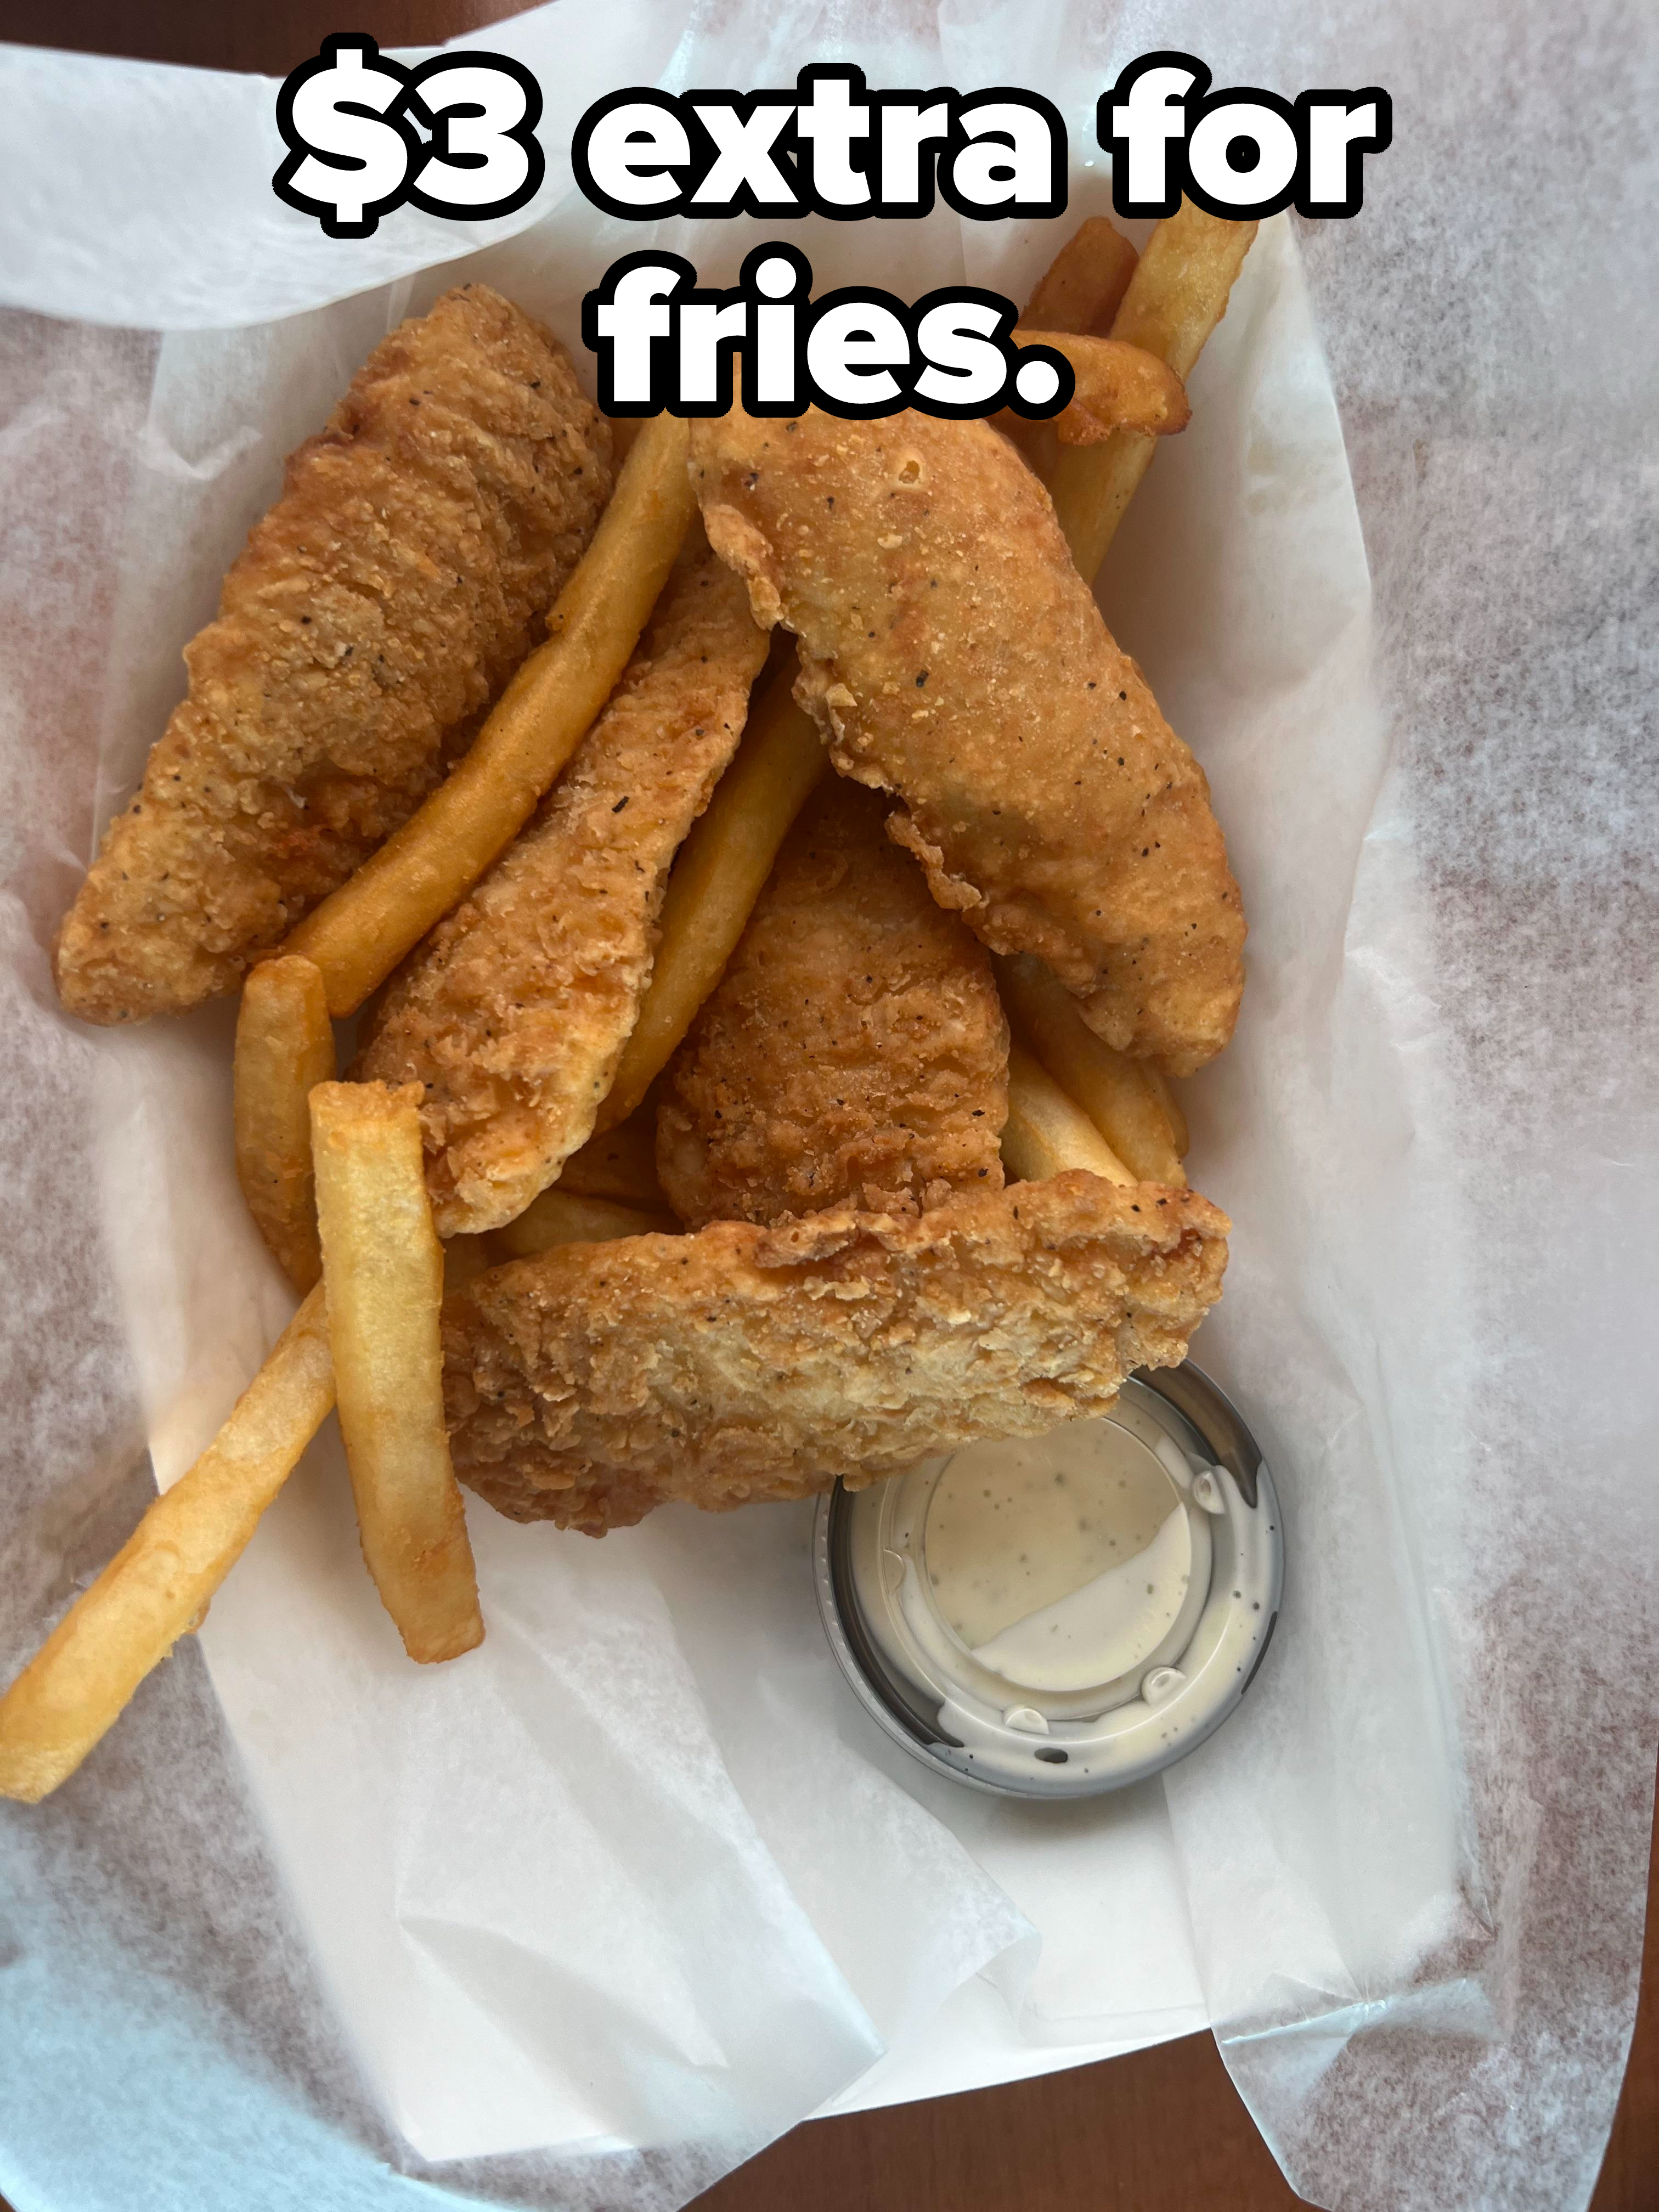 Chicken strips with hardly any fries